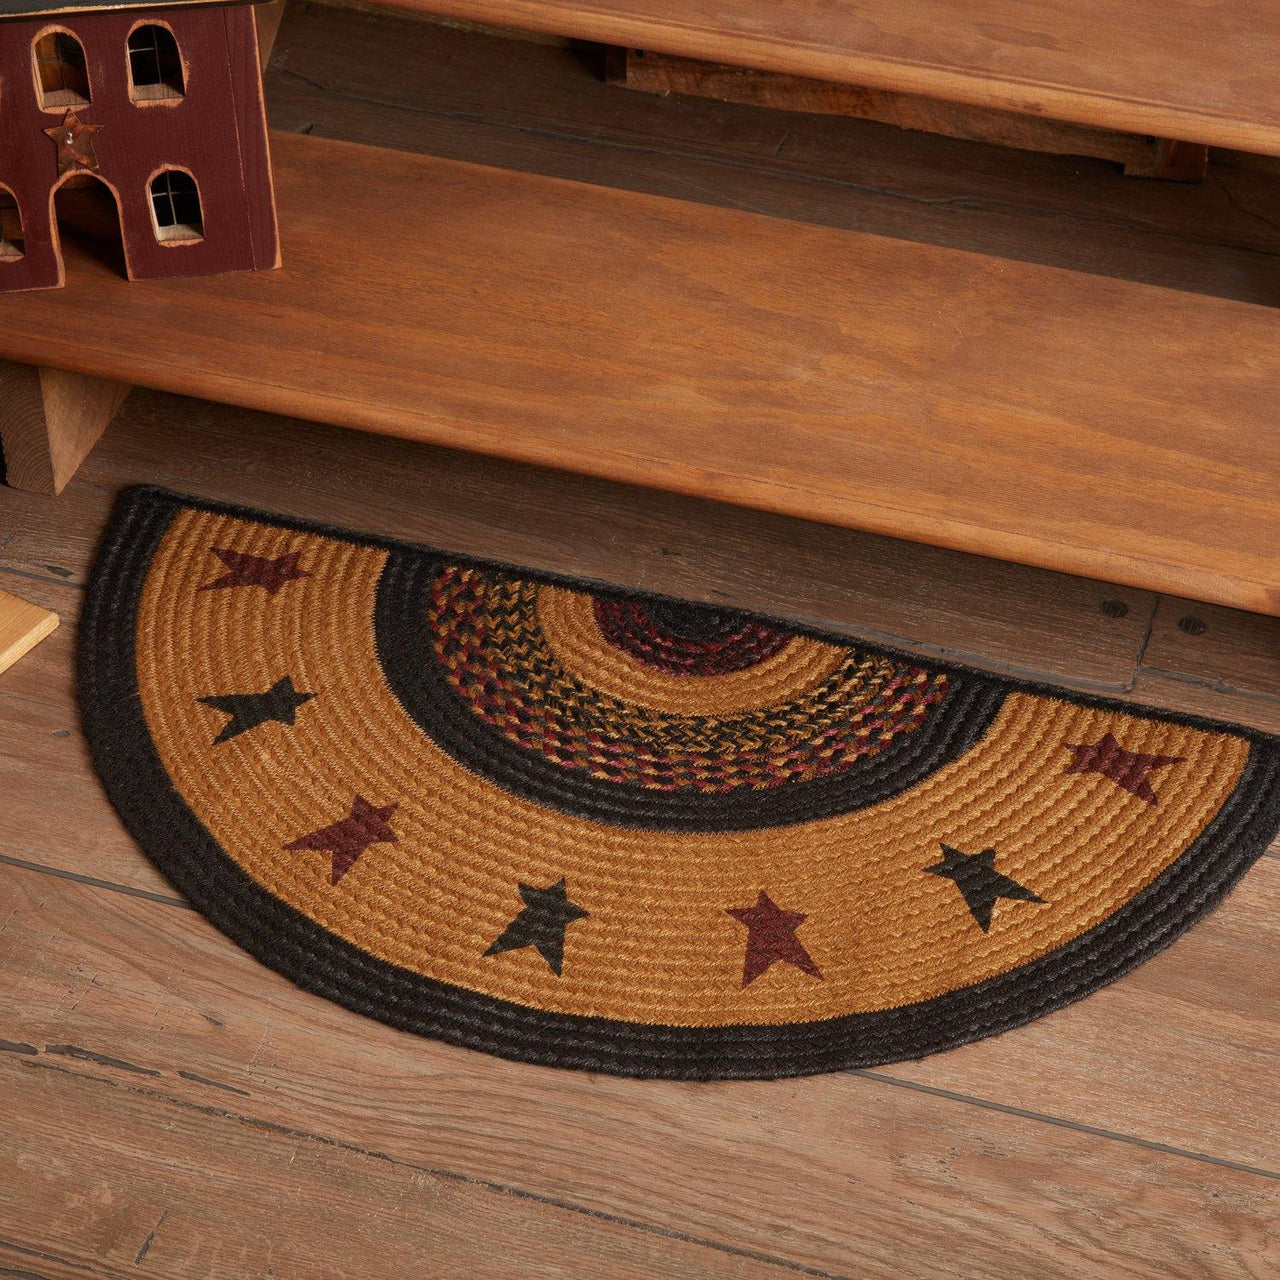 Heritage Farms Star Jute Braided Rug Half Circle 16.5"x33" with Rug Pad VHC Brands - The Fox Decor